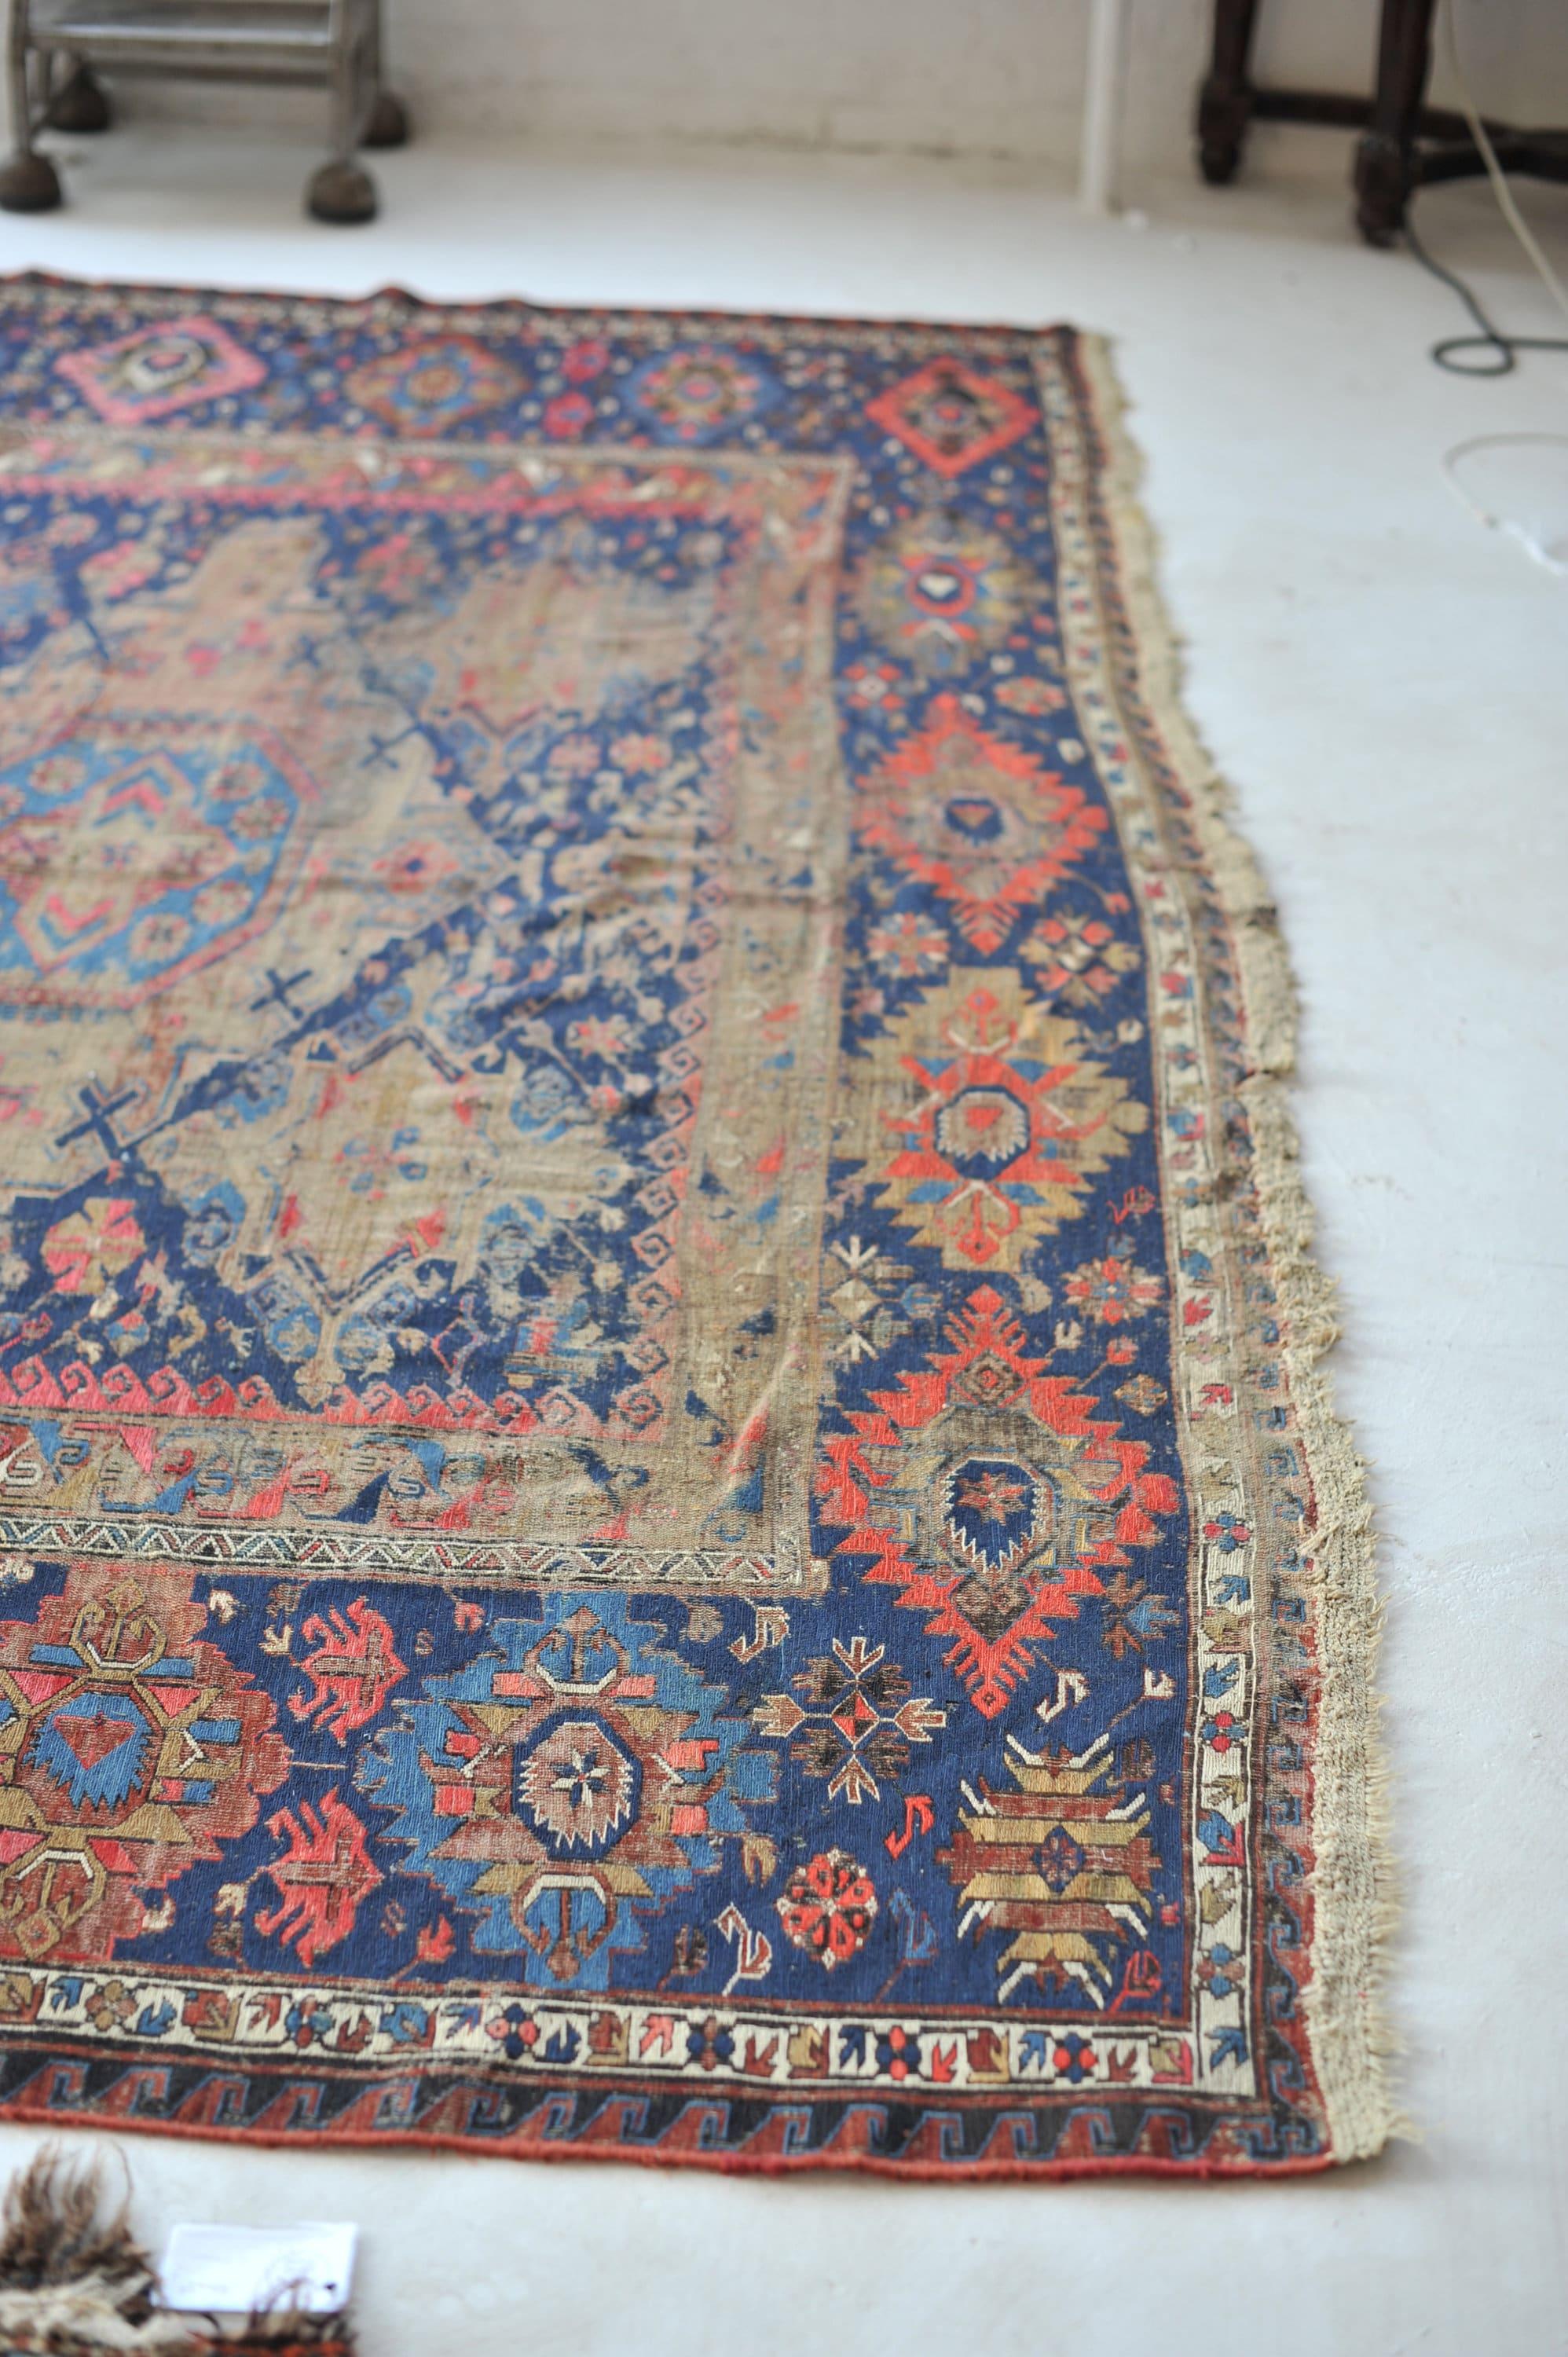 Wool One-of-one Over-sized Palatial Antique Sumac Textile Rug, c.1910 For Sale